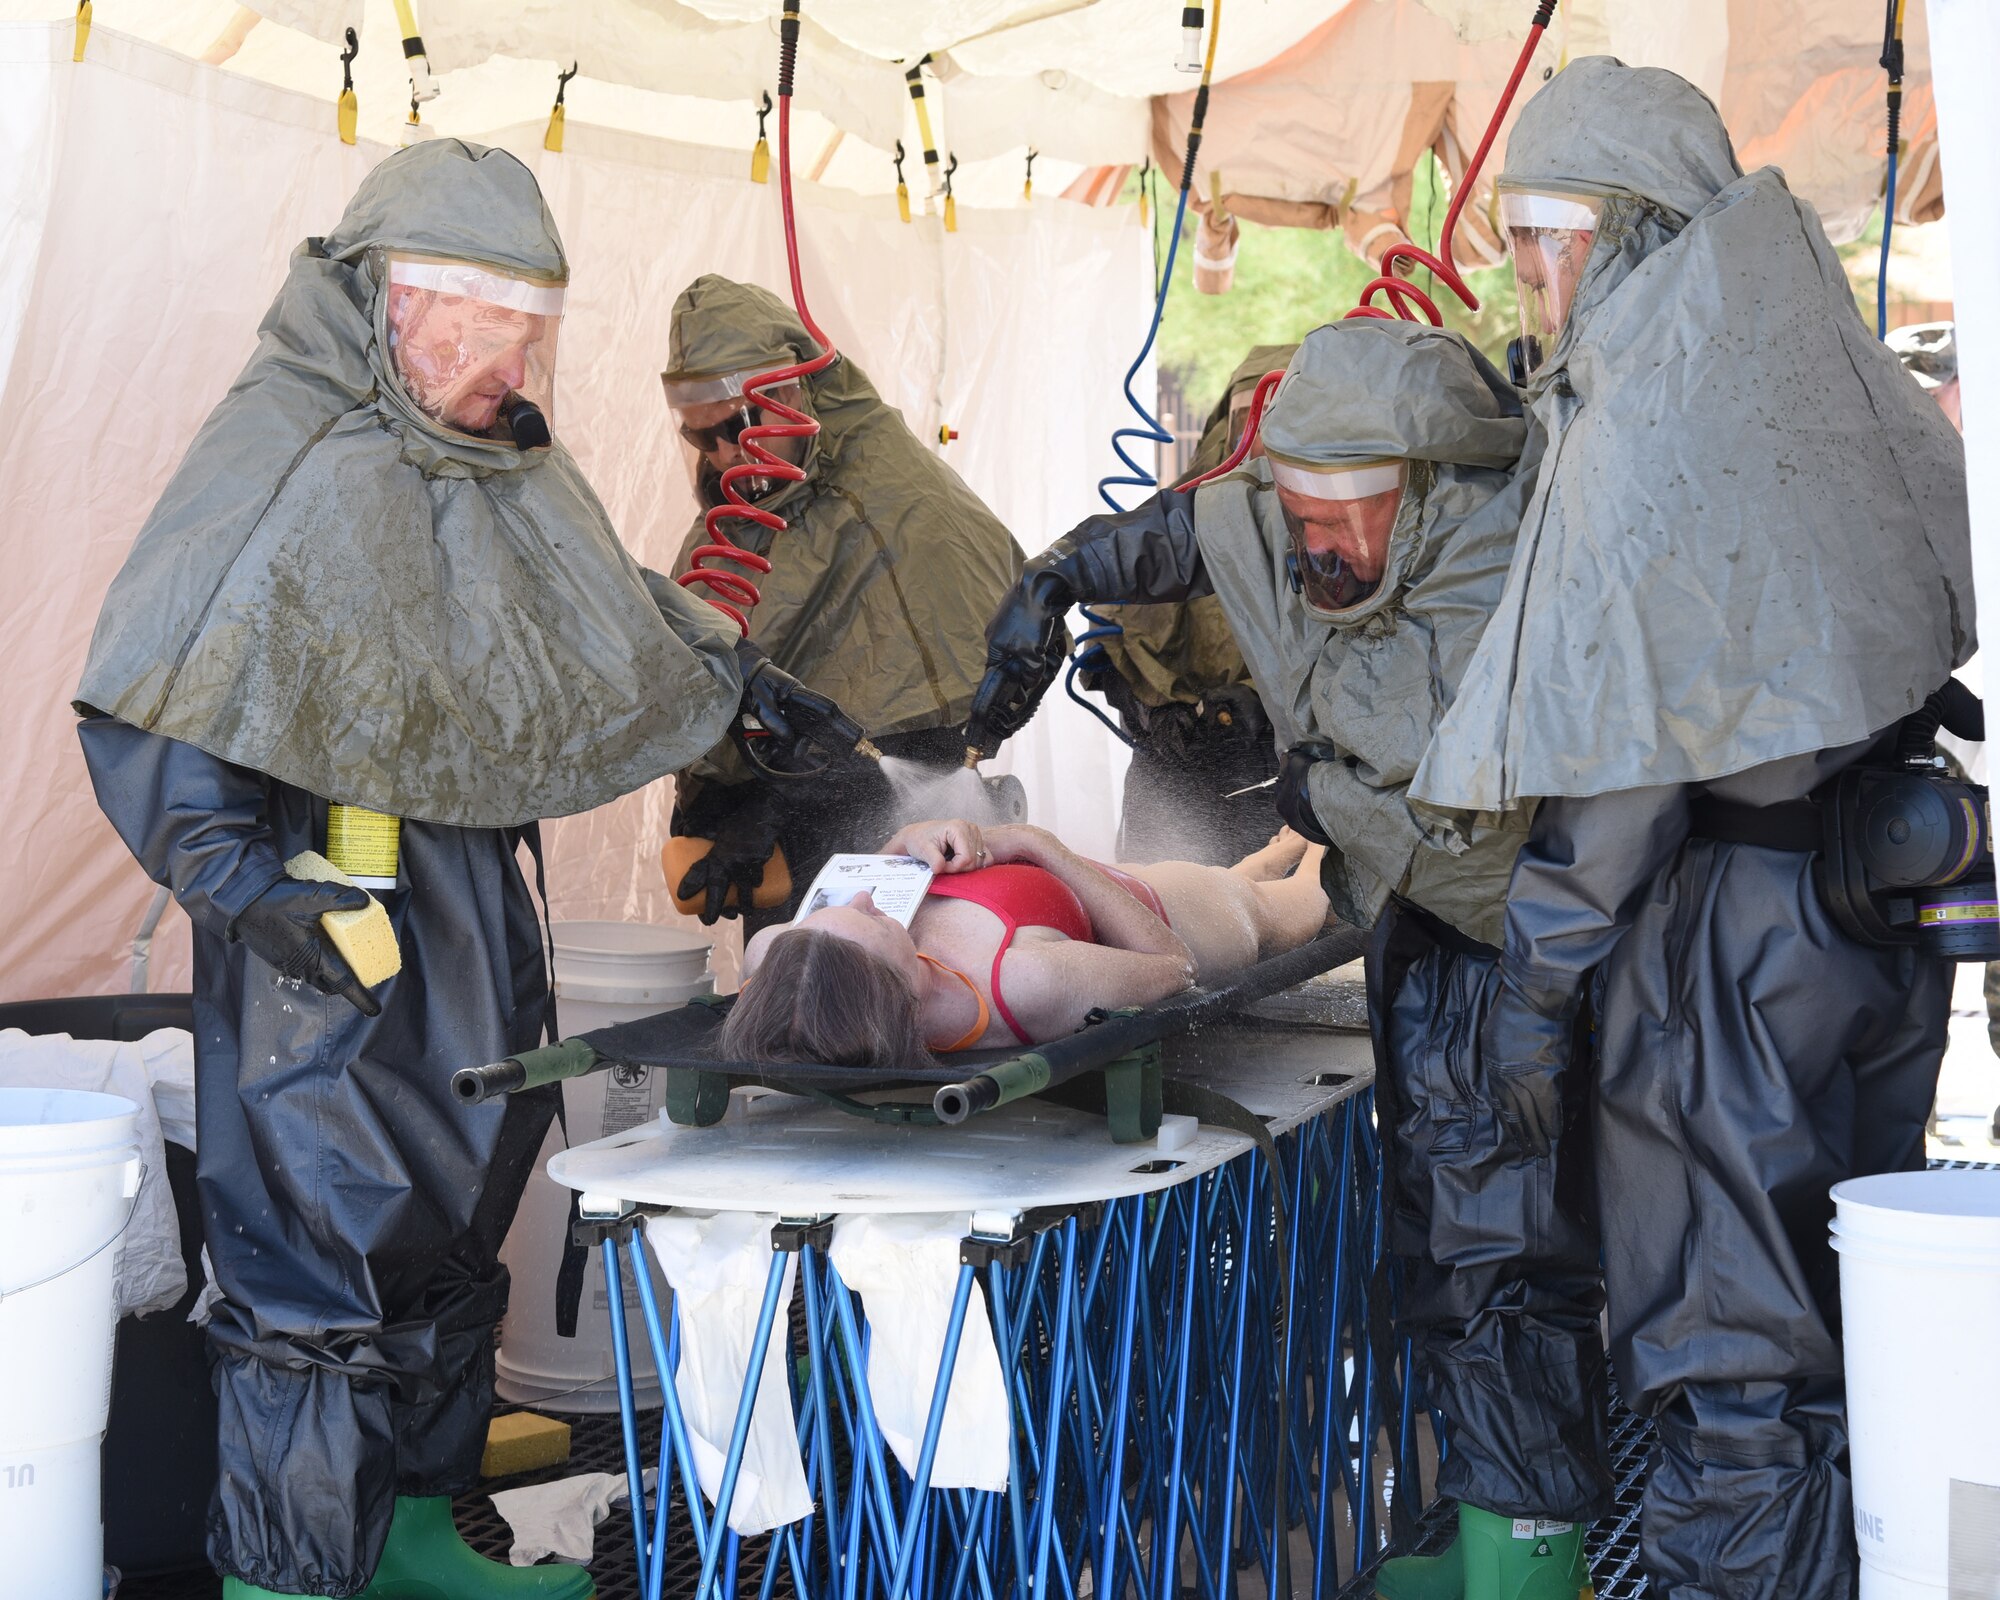 Members of the 161st Air Refueling Wing process a patient through an In-Place Patient Decontamination station during an exercise at the Goldwater Air National Guard Base, May 22, 2018. The purpose of the exercise was to train and evaluate the IPPD team's ability to decontaminate and prepare a patient to be transported onto a higher level of medical care. (U.S. National Guard photo by Staff Sgt. Wes Parrell)